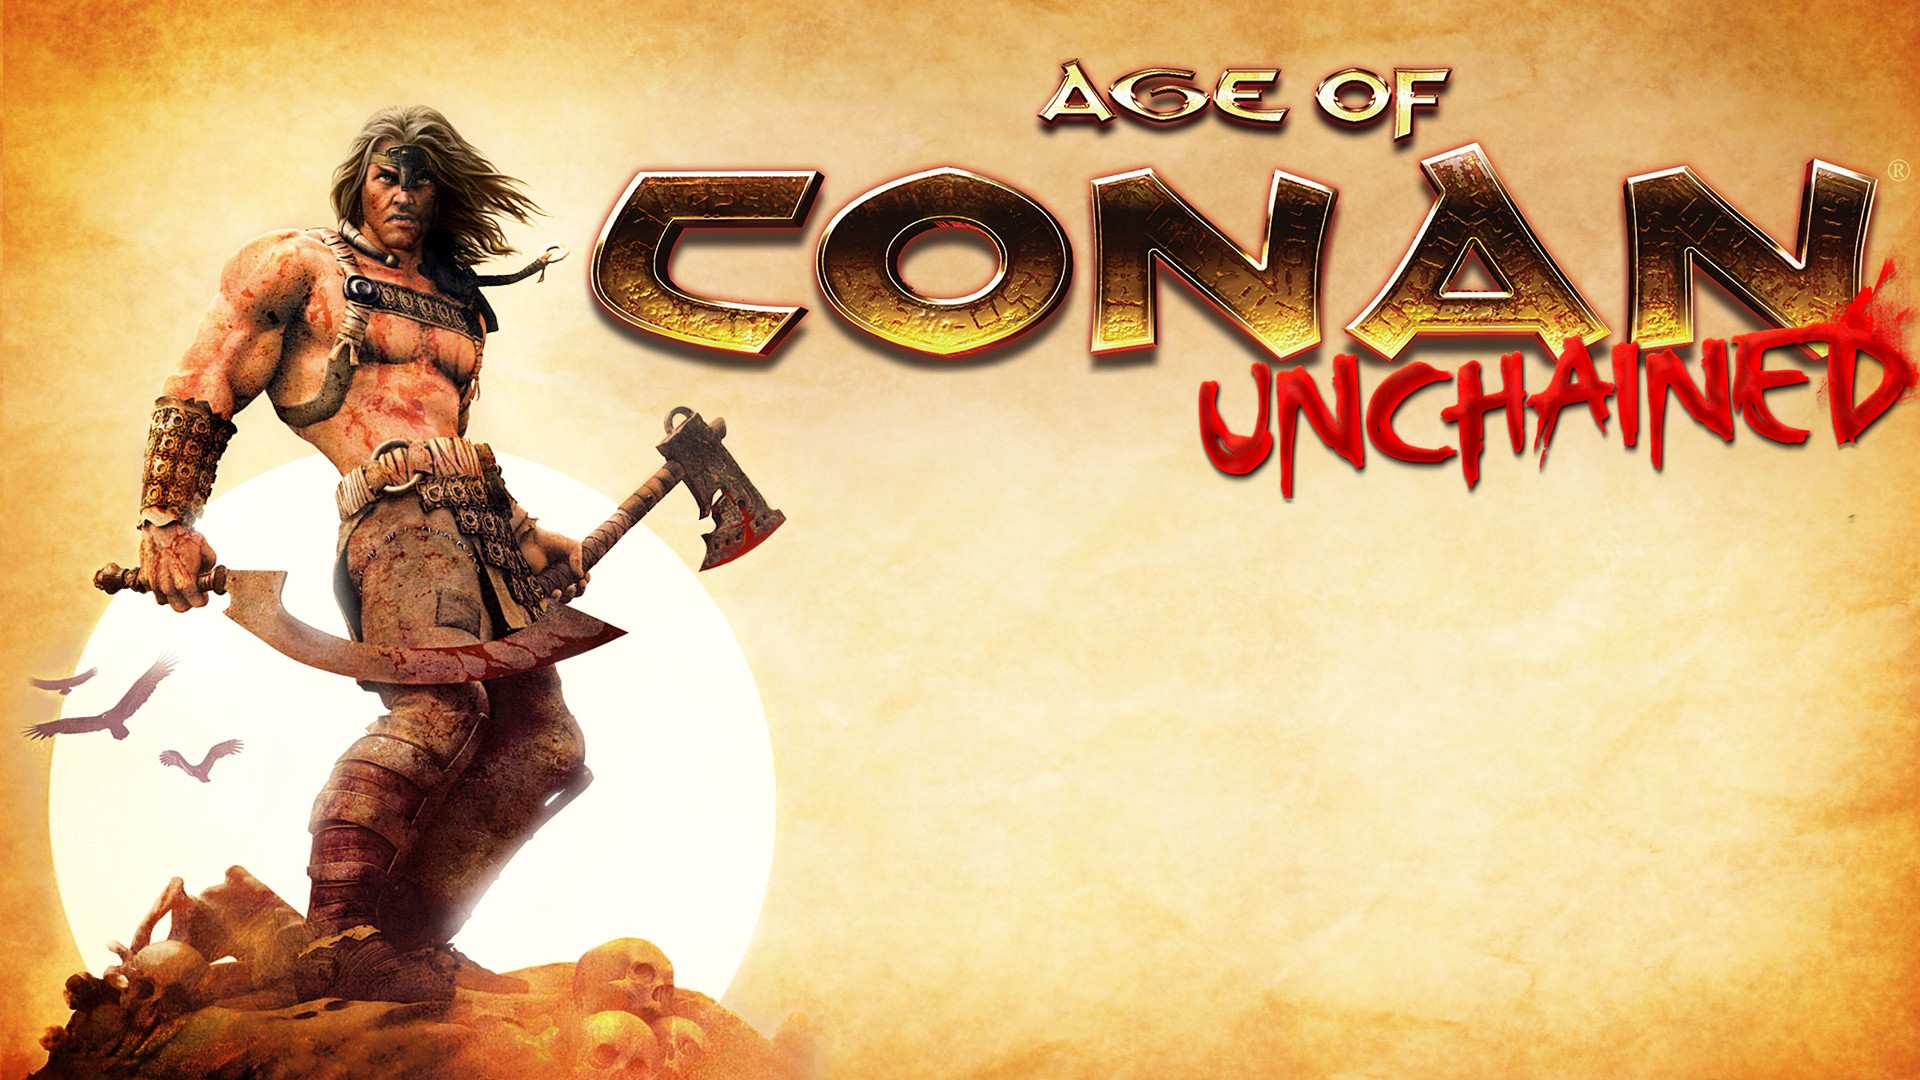 Age of Conan: Unchained screenshot